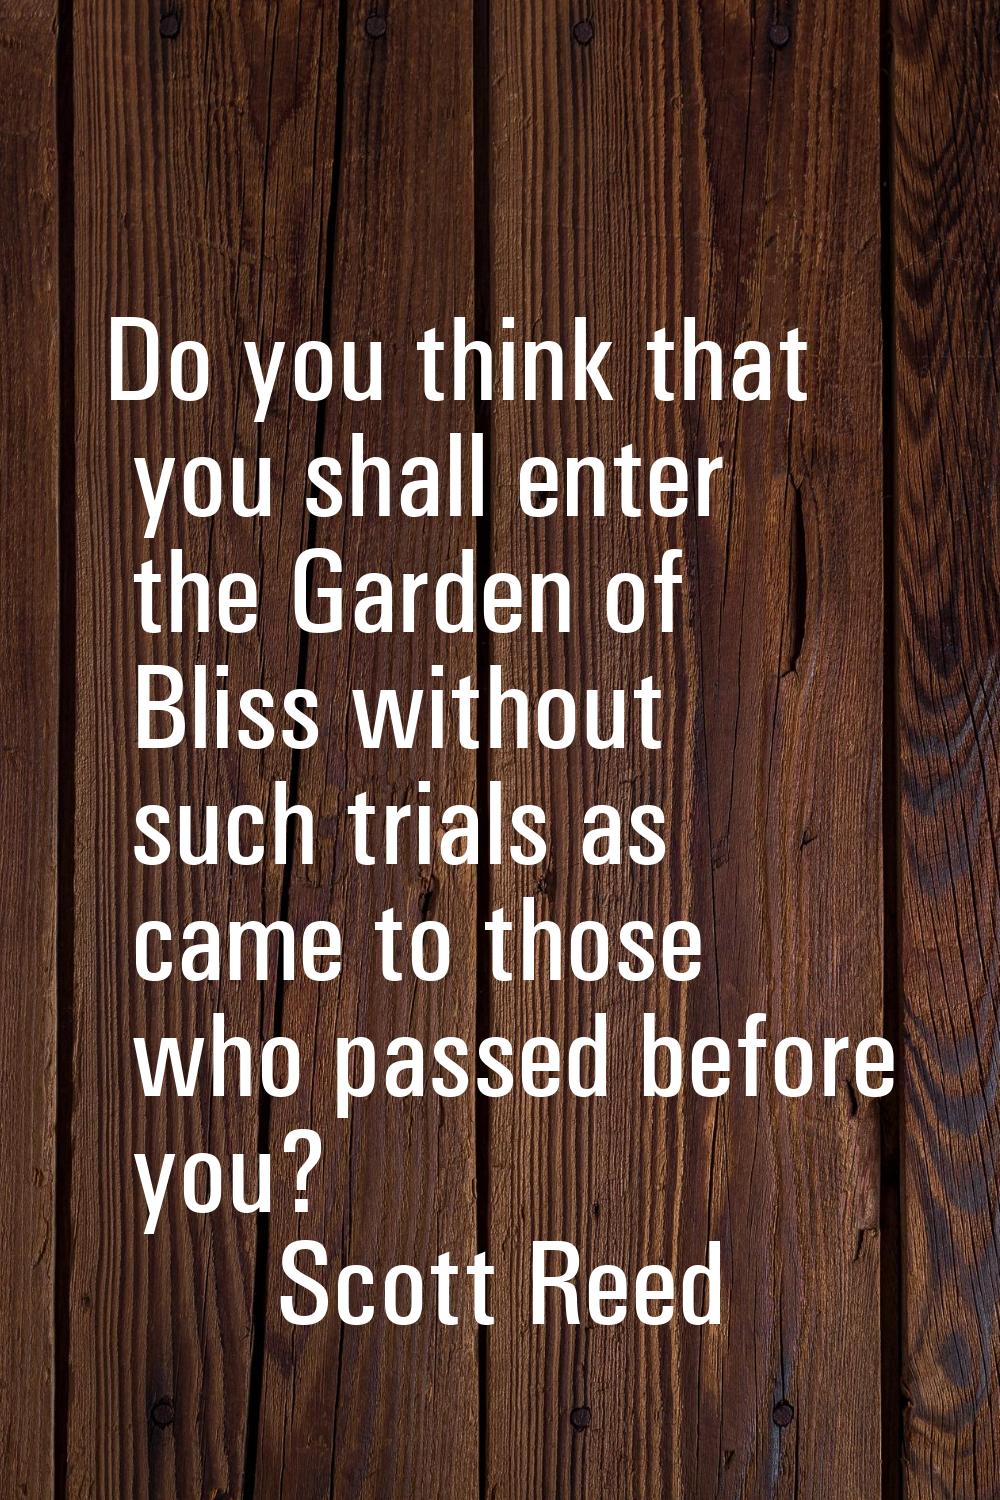 Do you think that you shall enter the Garden of Bliss without such trials as came to those who pass